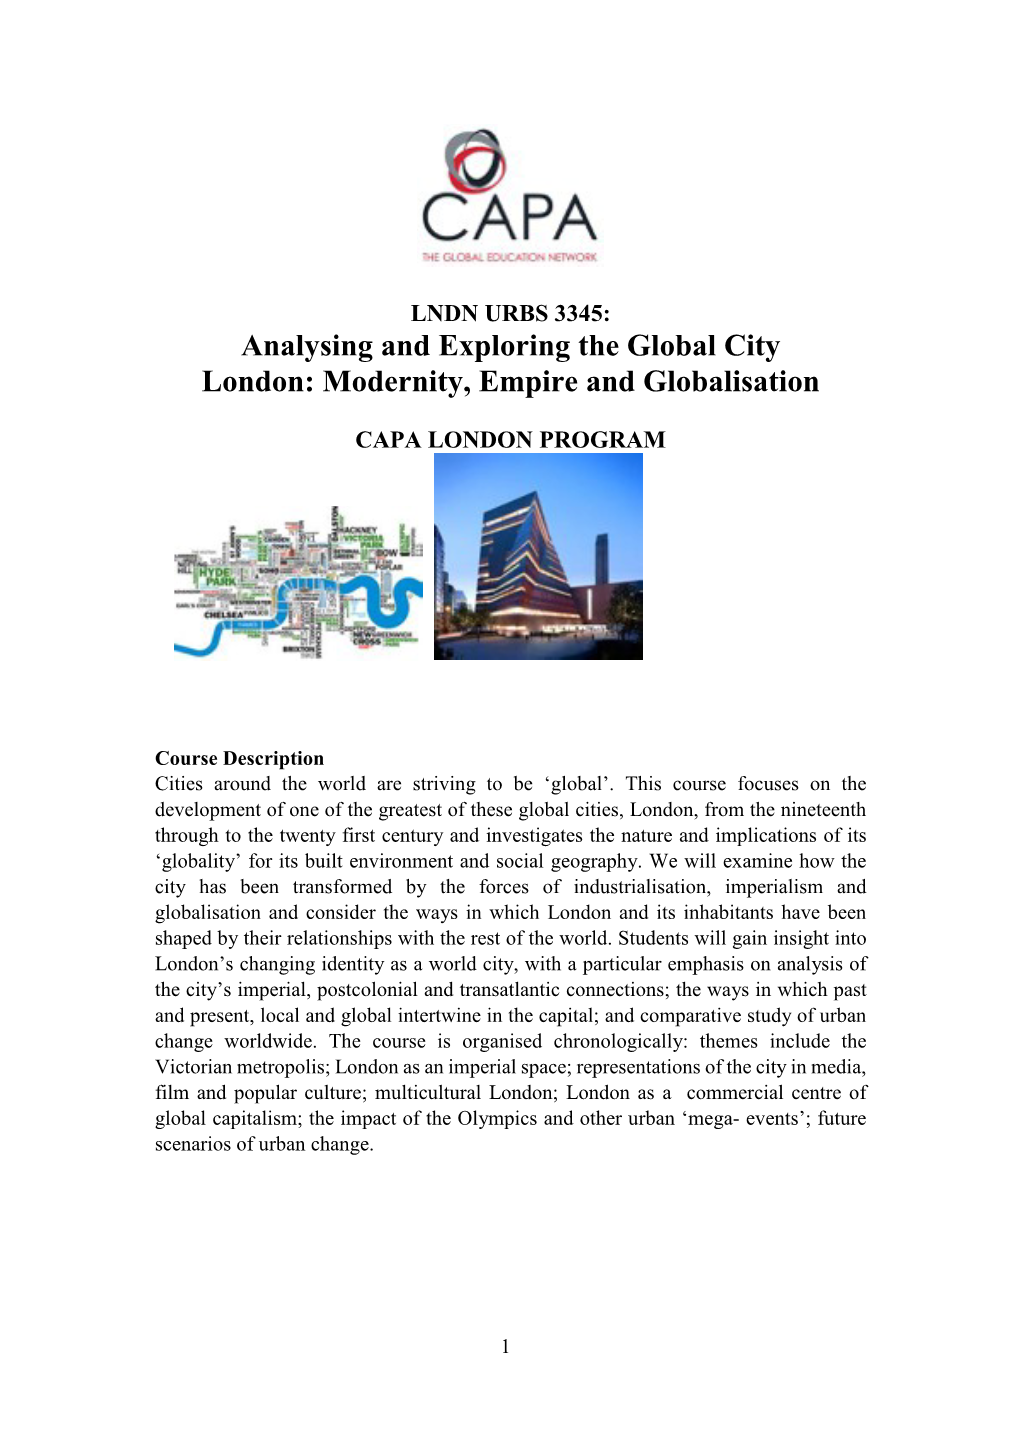 Analysing and Exploring the Global City London: Modernity, Empire and Globalisation